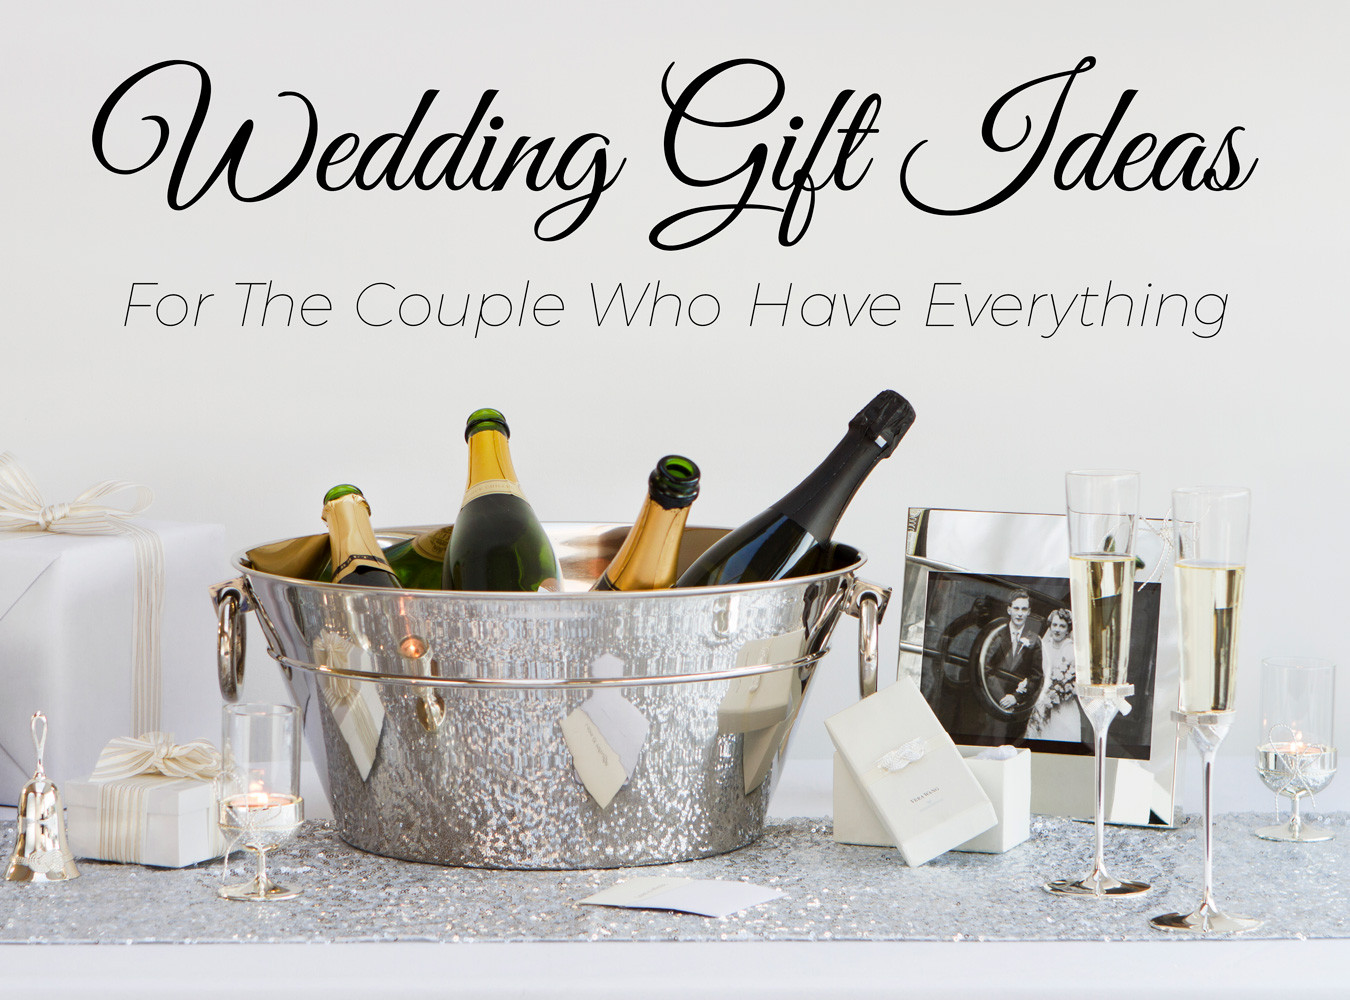 Christmas Gift Ideas For Young Married Couples
 Gift Ideas For Couples Who Have Everything